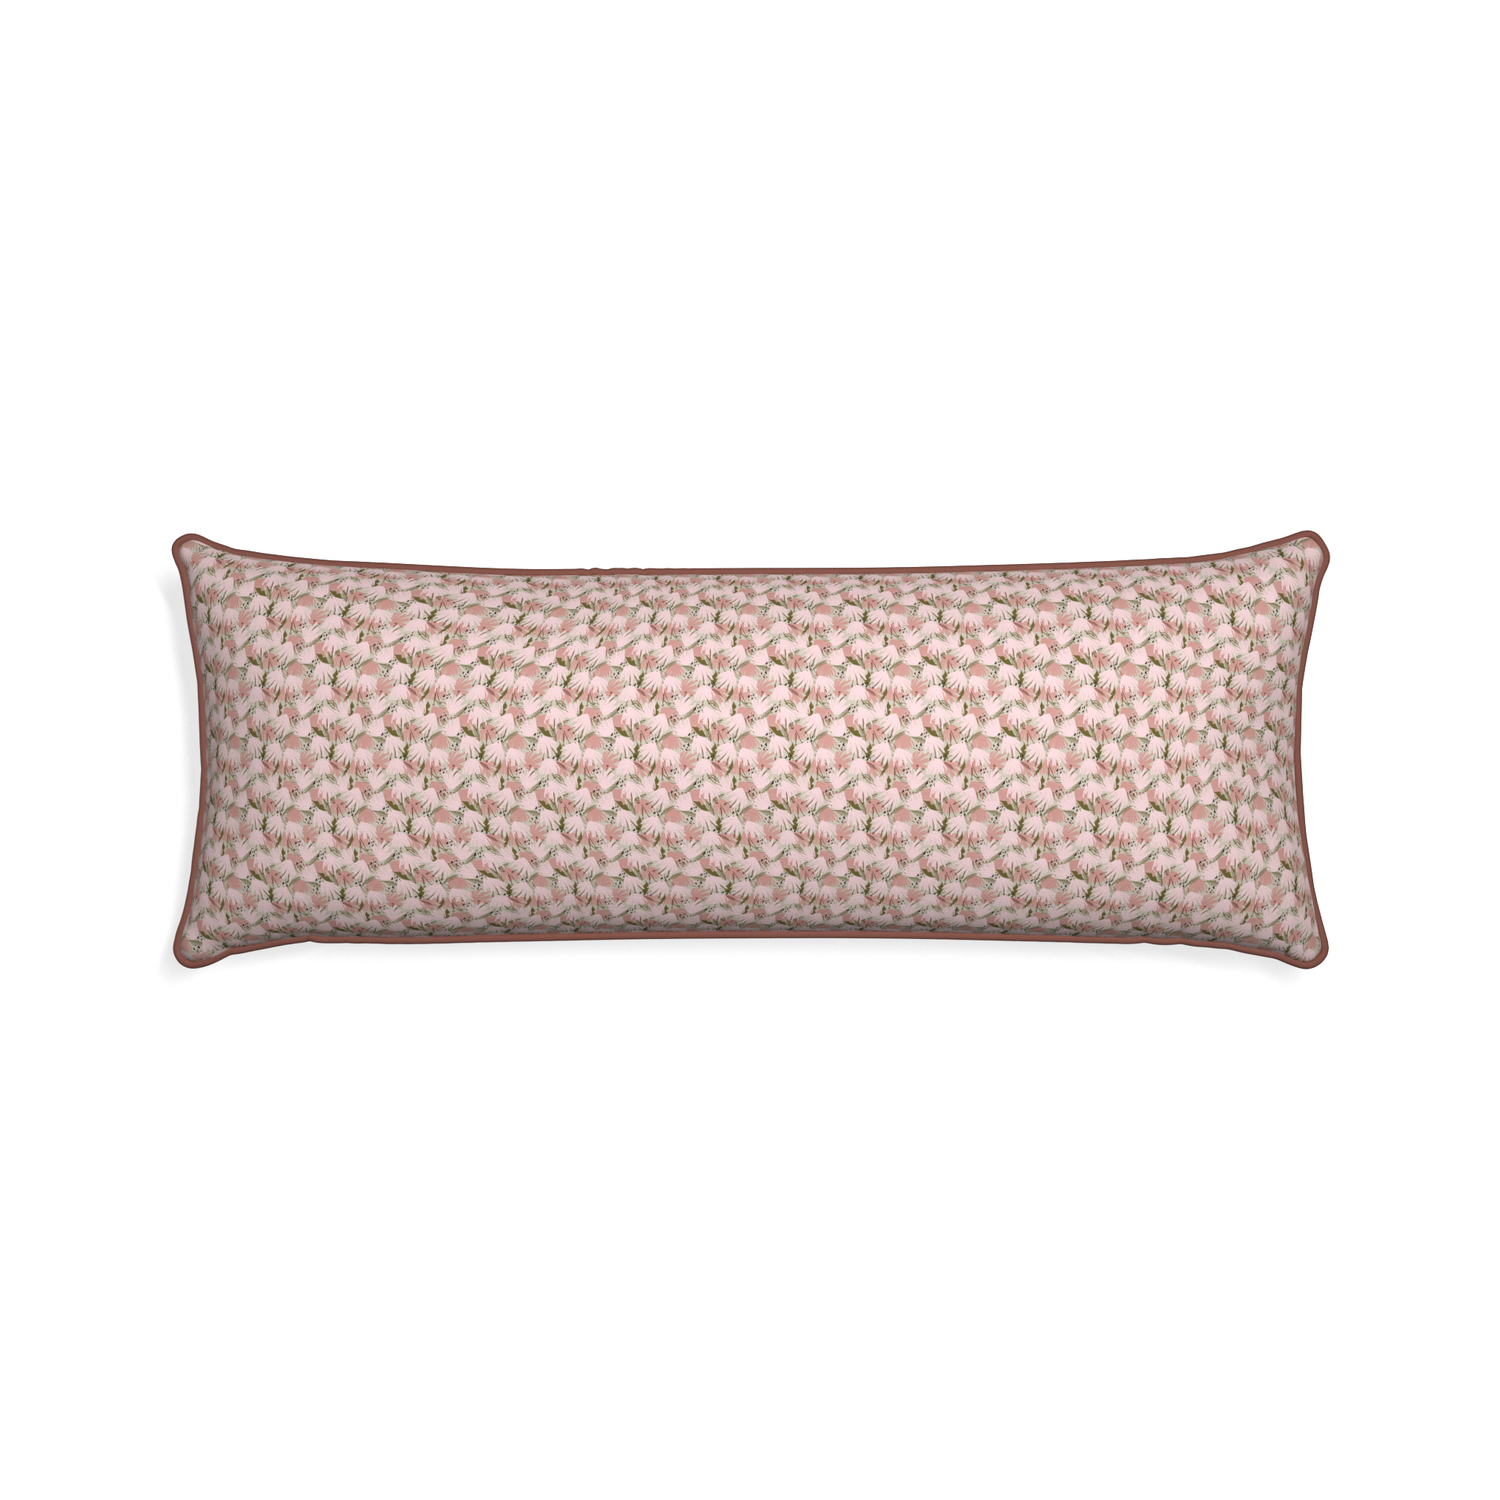 Xl-lumbar eden pink custom pink floralpillow with w piping on white background